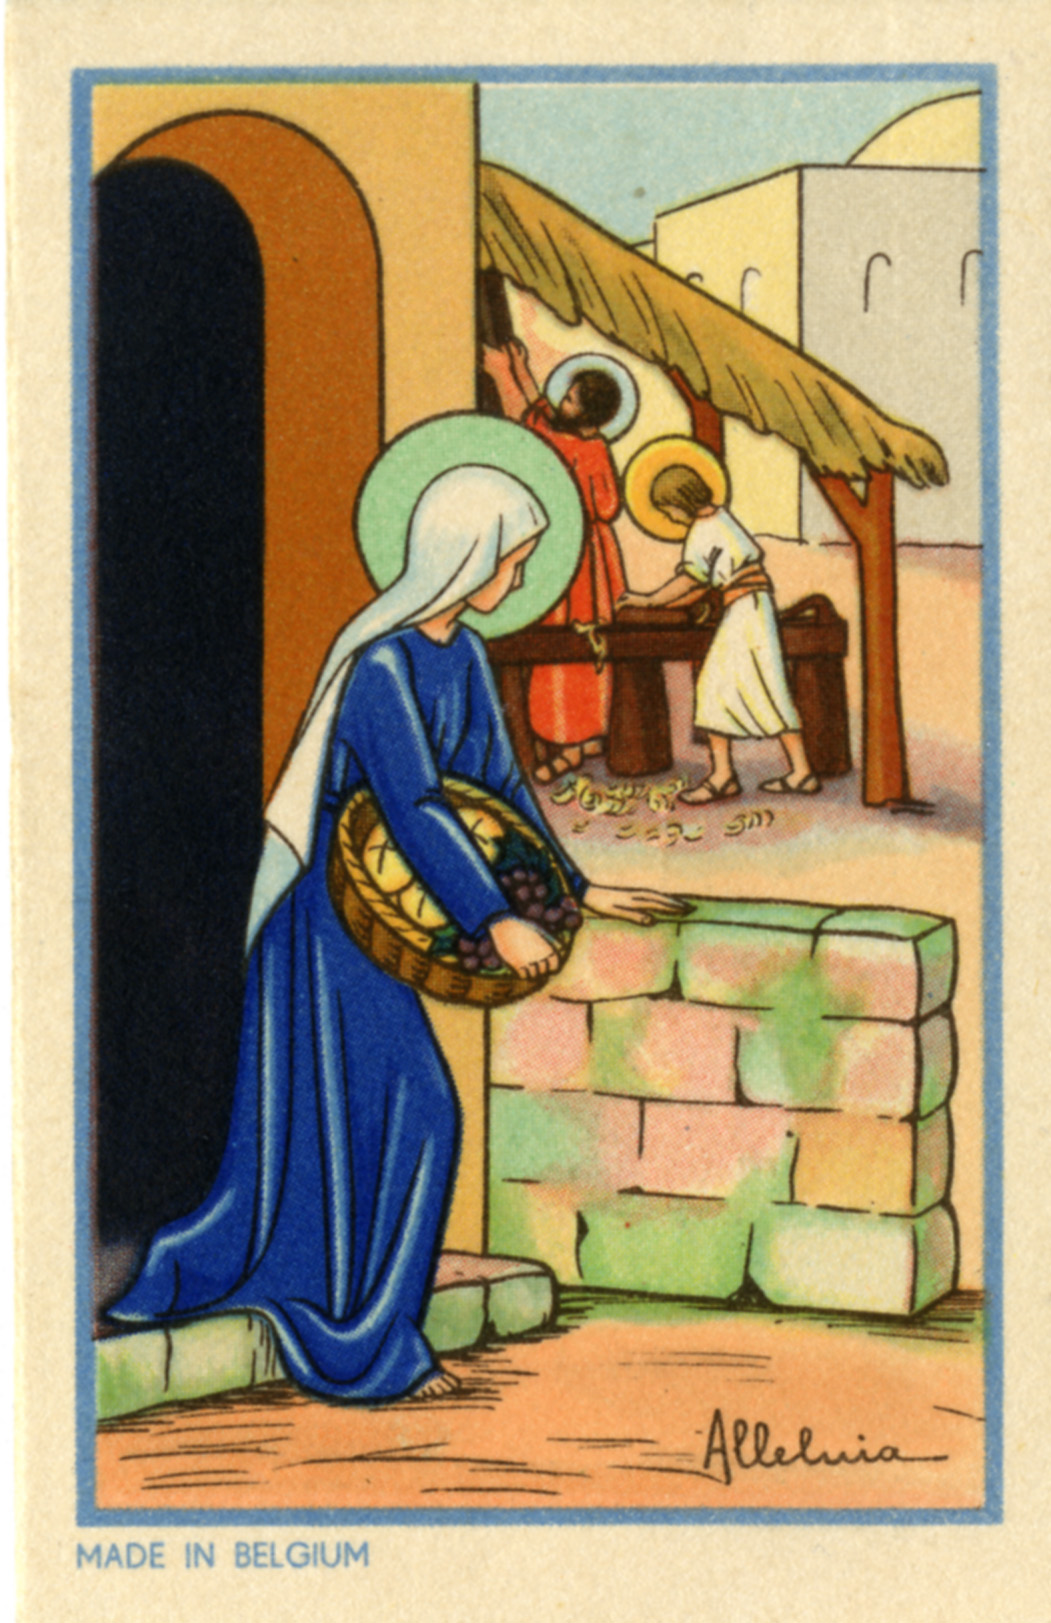 Full color holy card of a scene of the Holy Family where Mary is looking on while Joseph works with Jesus in the distance.